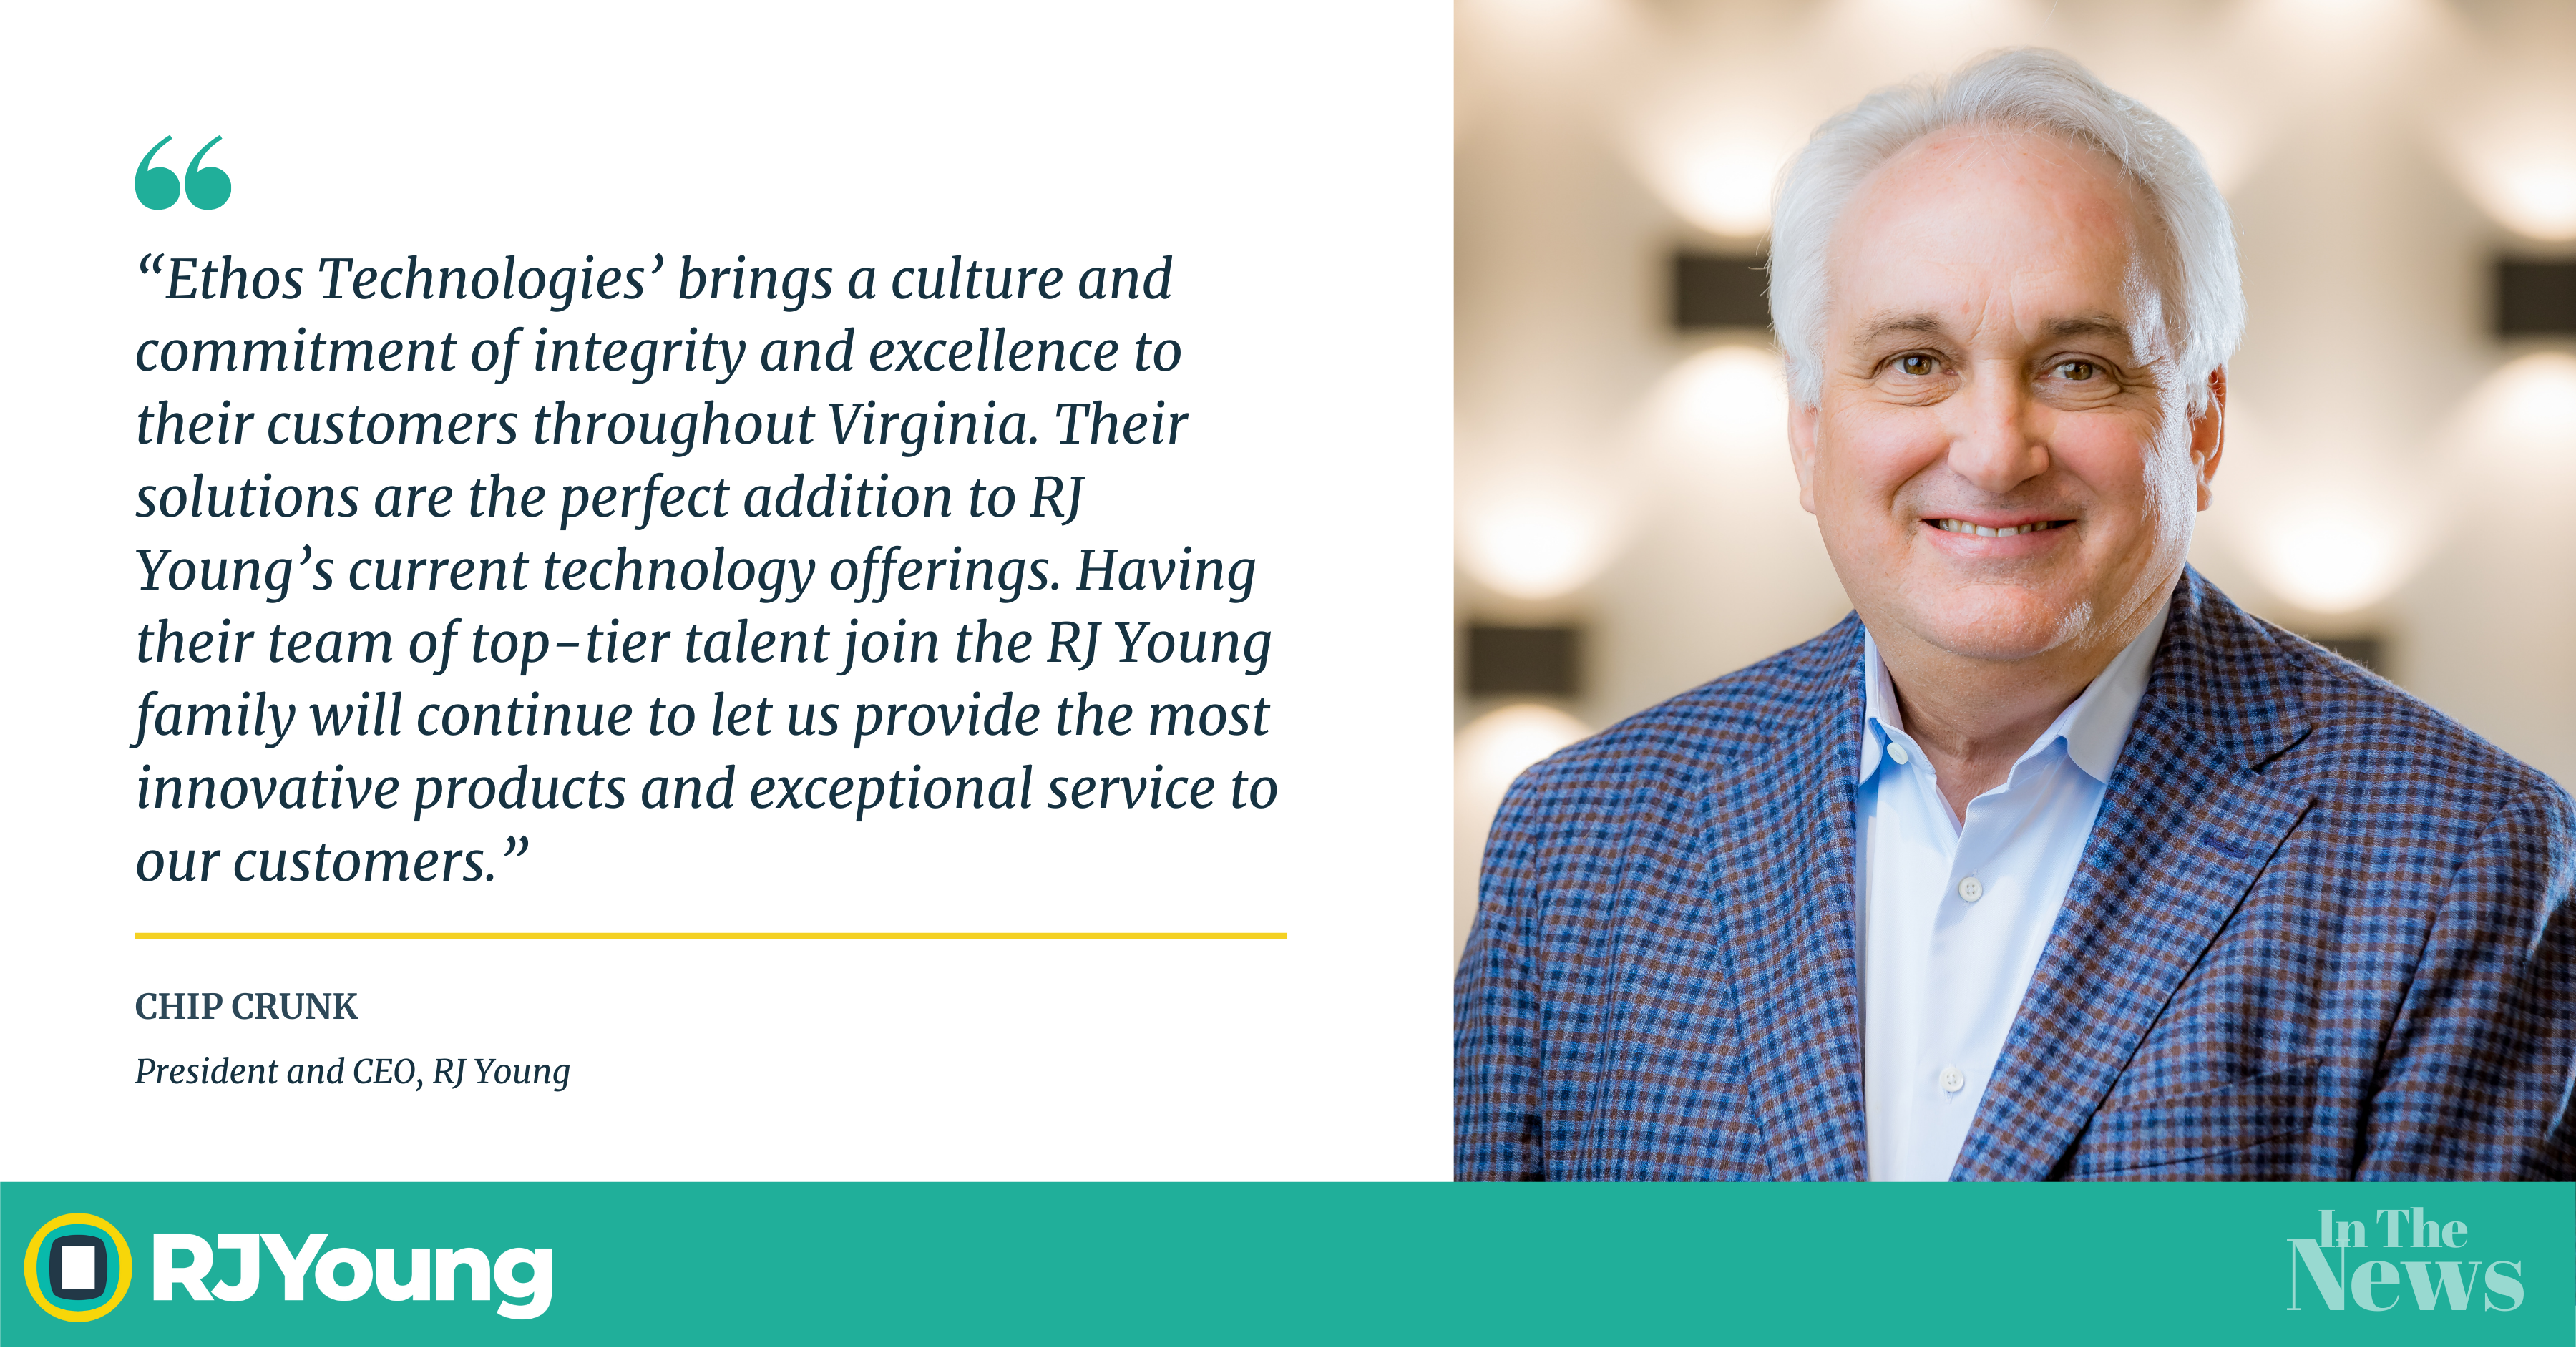 Nashville-based business technology and office equipment supplier RJ Young announced Monday its acquisition of Virginia peer Ethos Technologies.  Terms of the deal were not disclosed in a release.  Previously known as Blue Ridge Copier and headquartered in Roanoke, Ethos Technologies bills itself as among the largest office technology and IT solutions providers based in Southwest Virginia. The company was founded in 1996 and specializes in services related to cyber defense, co-managed IT and office technology equipment.  This is RJ Young’s ninth acquisition in the past five years. With the deal, the company adds Ethos Technologies’ 26 employees to its personnel roster of 600. The release does not note if Ethos Technologies will continue to operate under its name.  Chip art Chip Crunk  Courtesy of RJ Young The purchase comes as RJ Young has grown the non-equipment side of its business by 360 percent since 2019. During this time, the company has updated its brand via a new website and logo.  “Ethos Technologies’ brings a culture and commitment of integrity and excellence to their customers throughout Virginia,” RJ Young President and CEO Chip Crunk said in the release. “Their solutions are the perfect addition to RJ Young’s current technology offerings.”